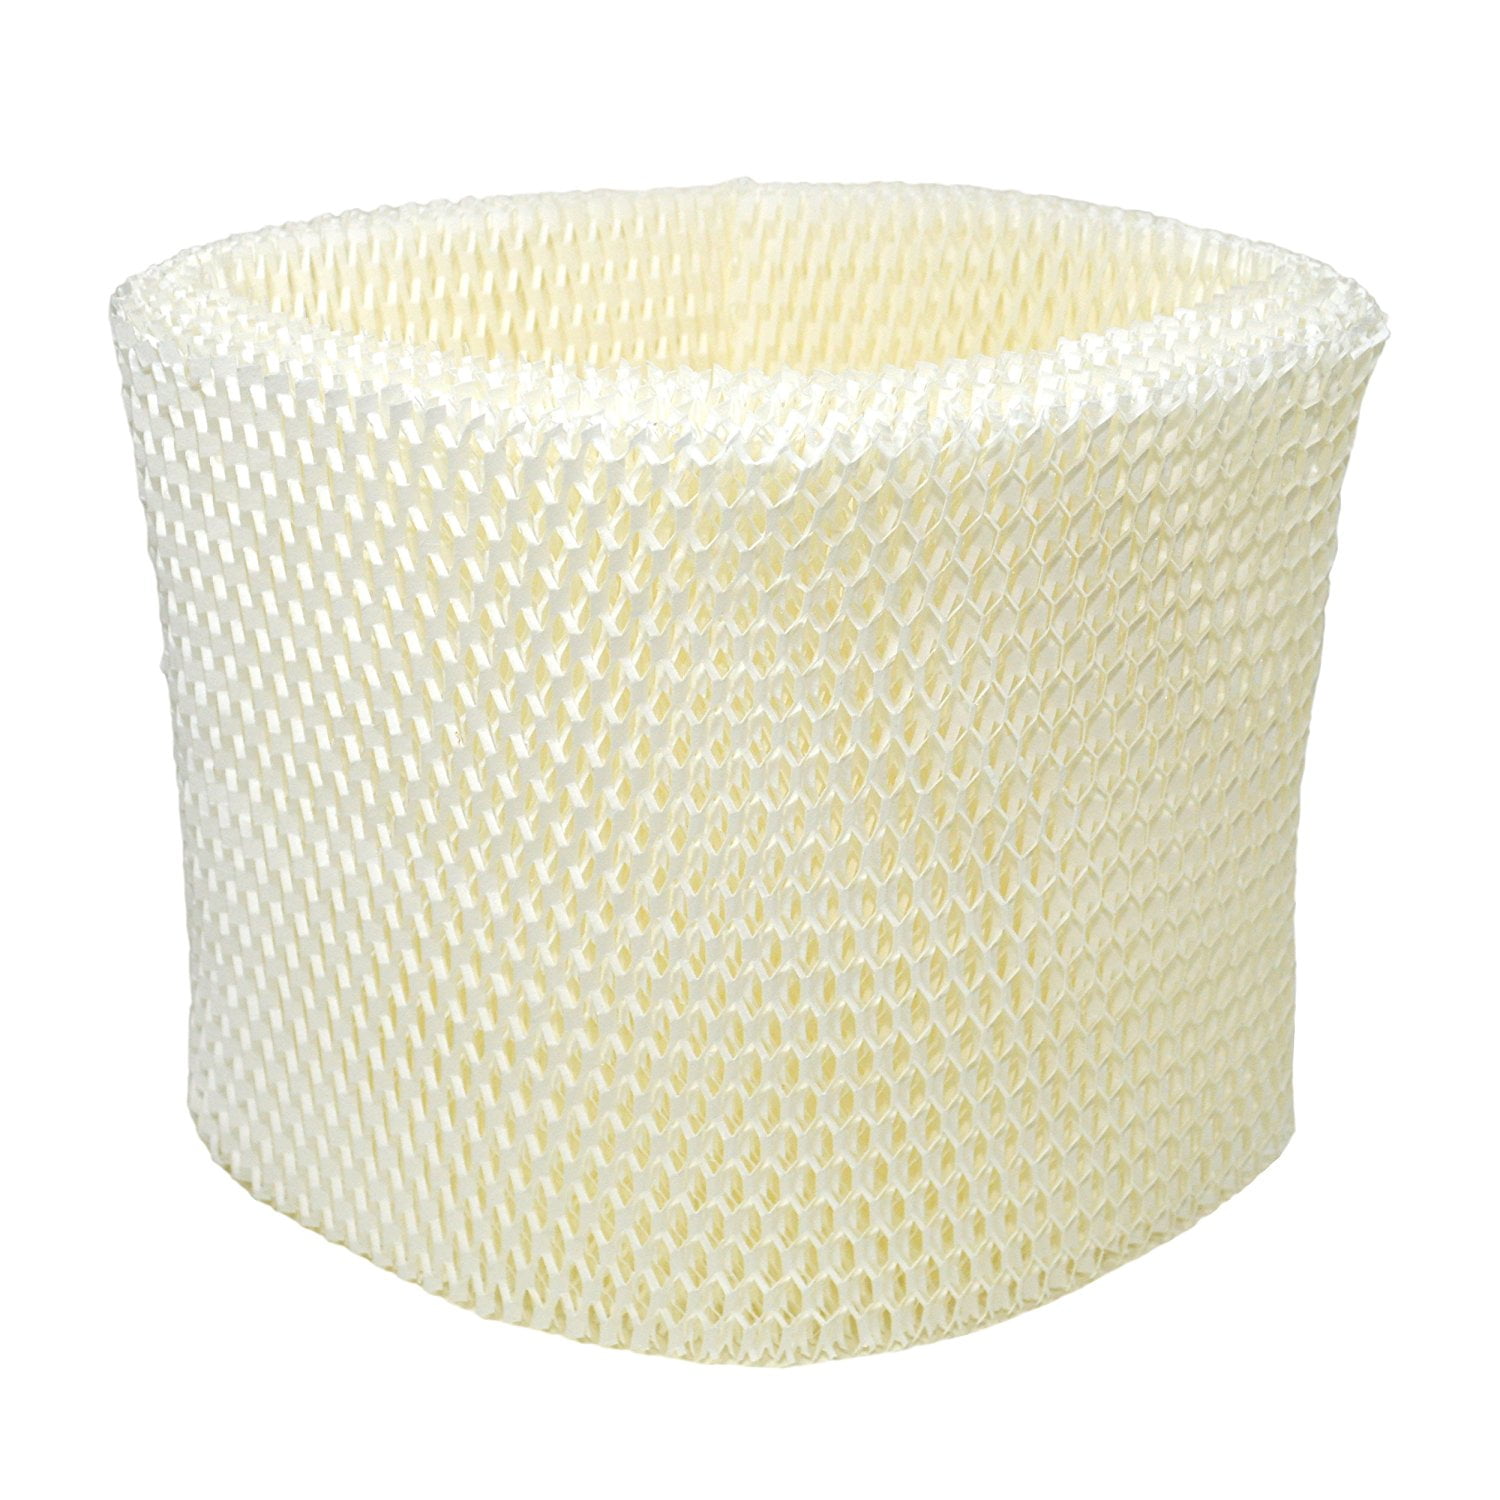 12-Pack Humidifier Filter for Holmes HWF65 